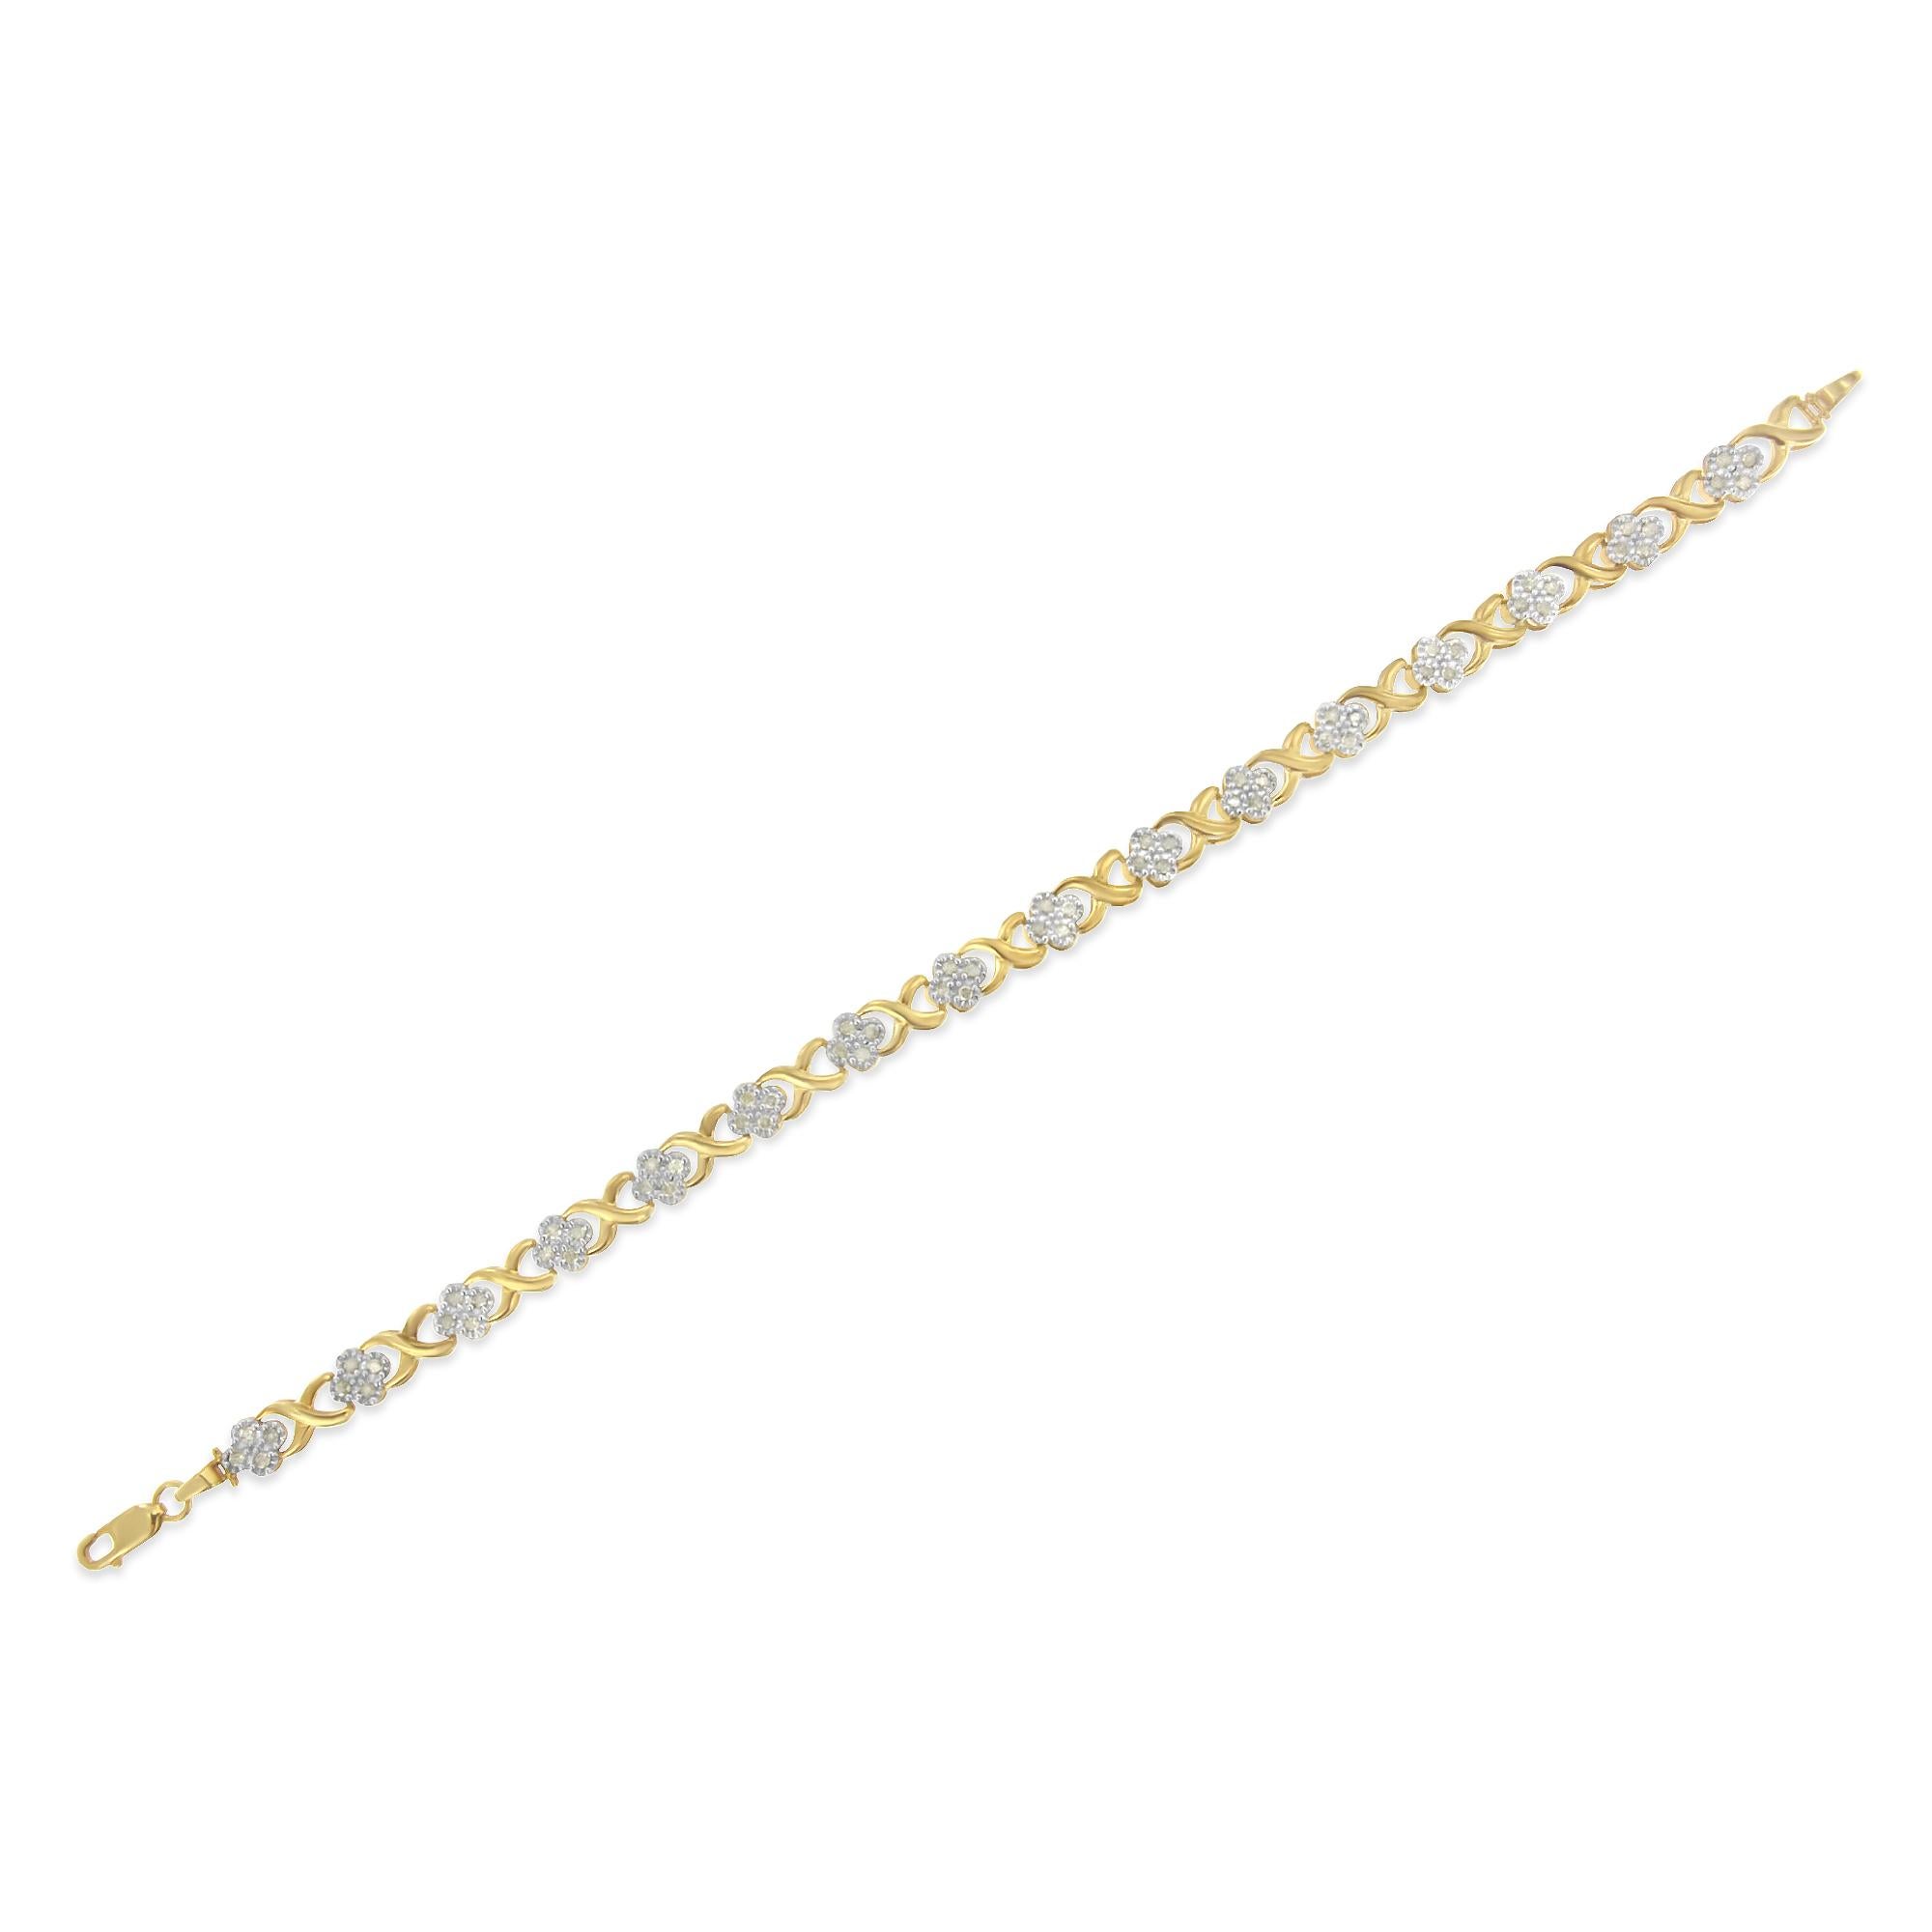 10K Yellow Gold 1.0 Carat Diamond Cluster X Link Tennis Link Bracelet In New Condition For Sale In New York, NY